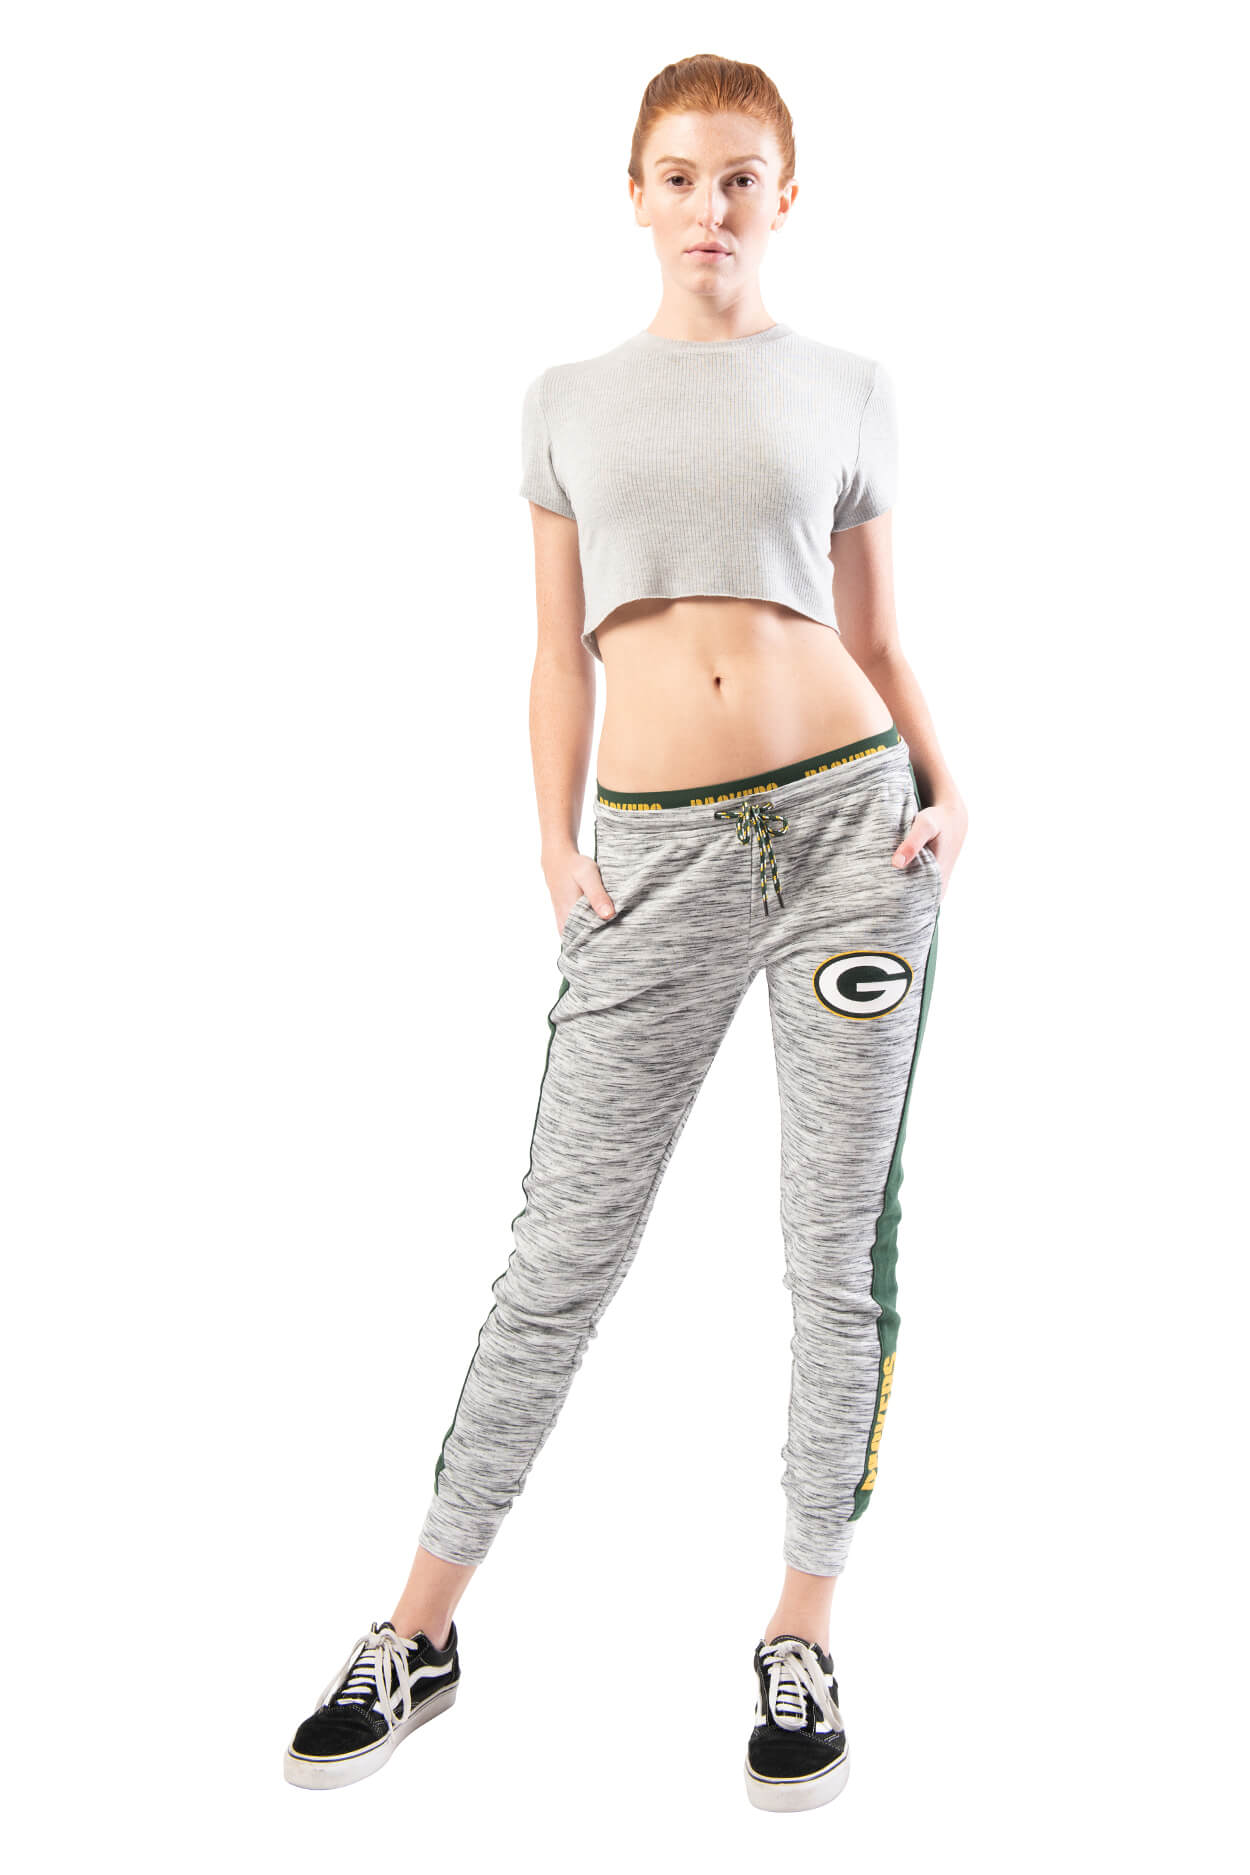 NFL Green Bay Packers Women's Basic Jogger|Green Bay Packers